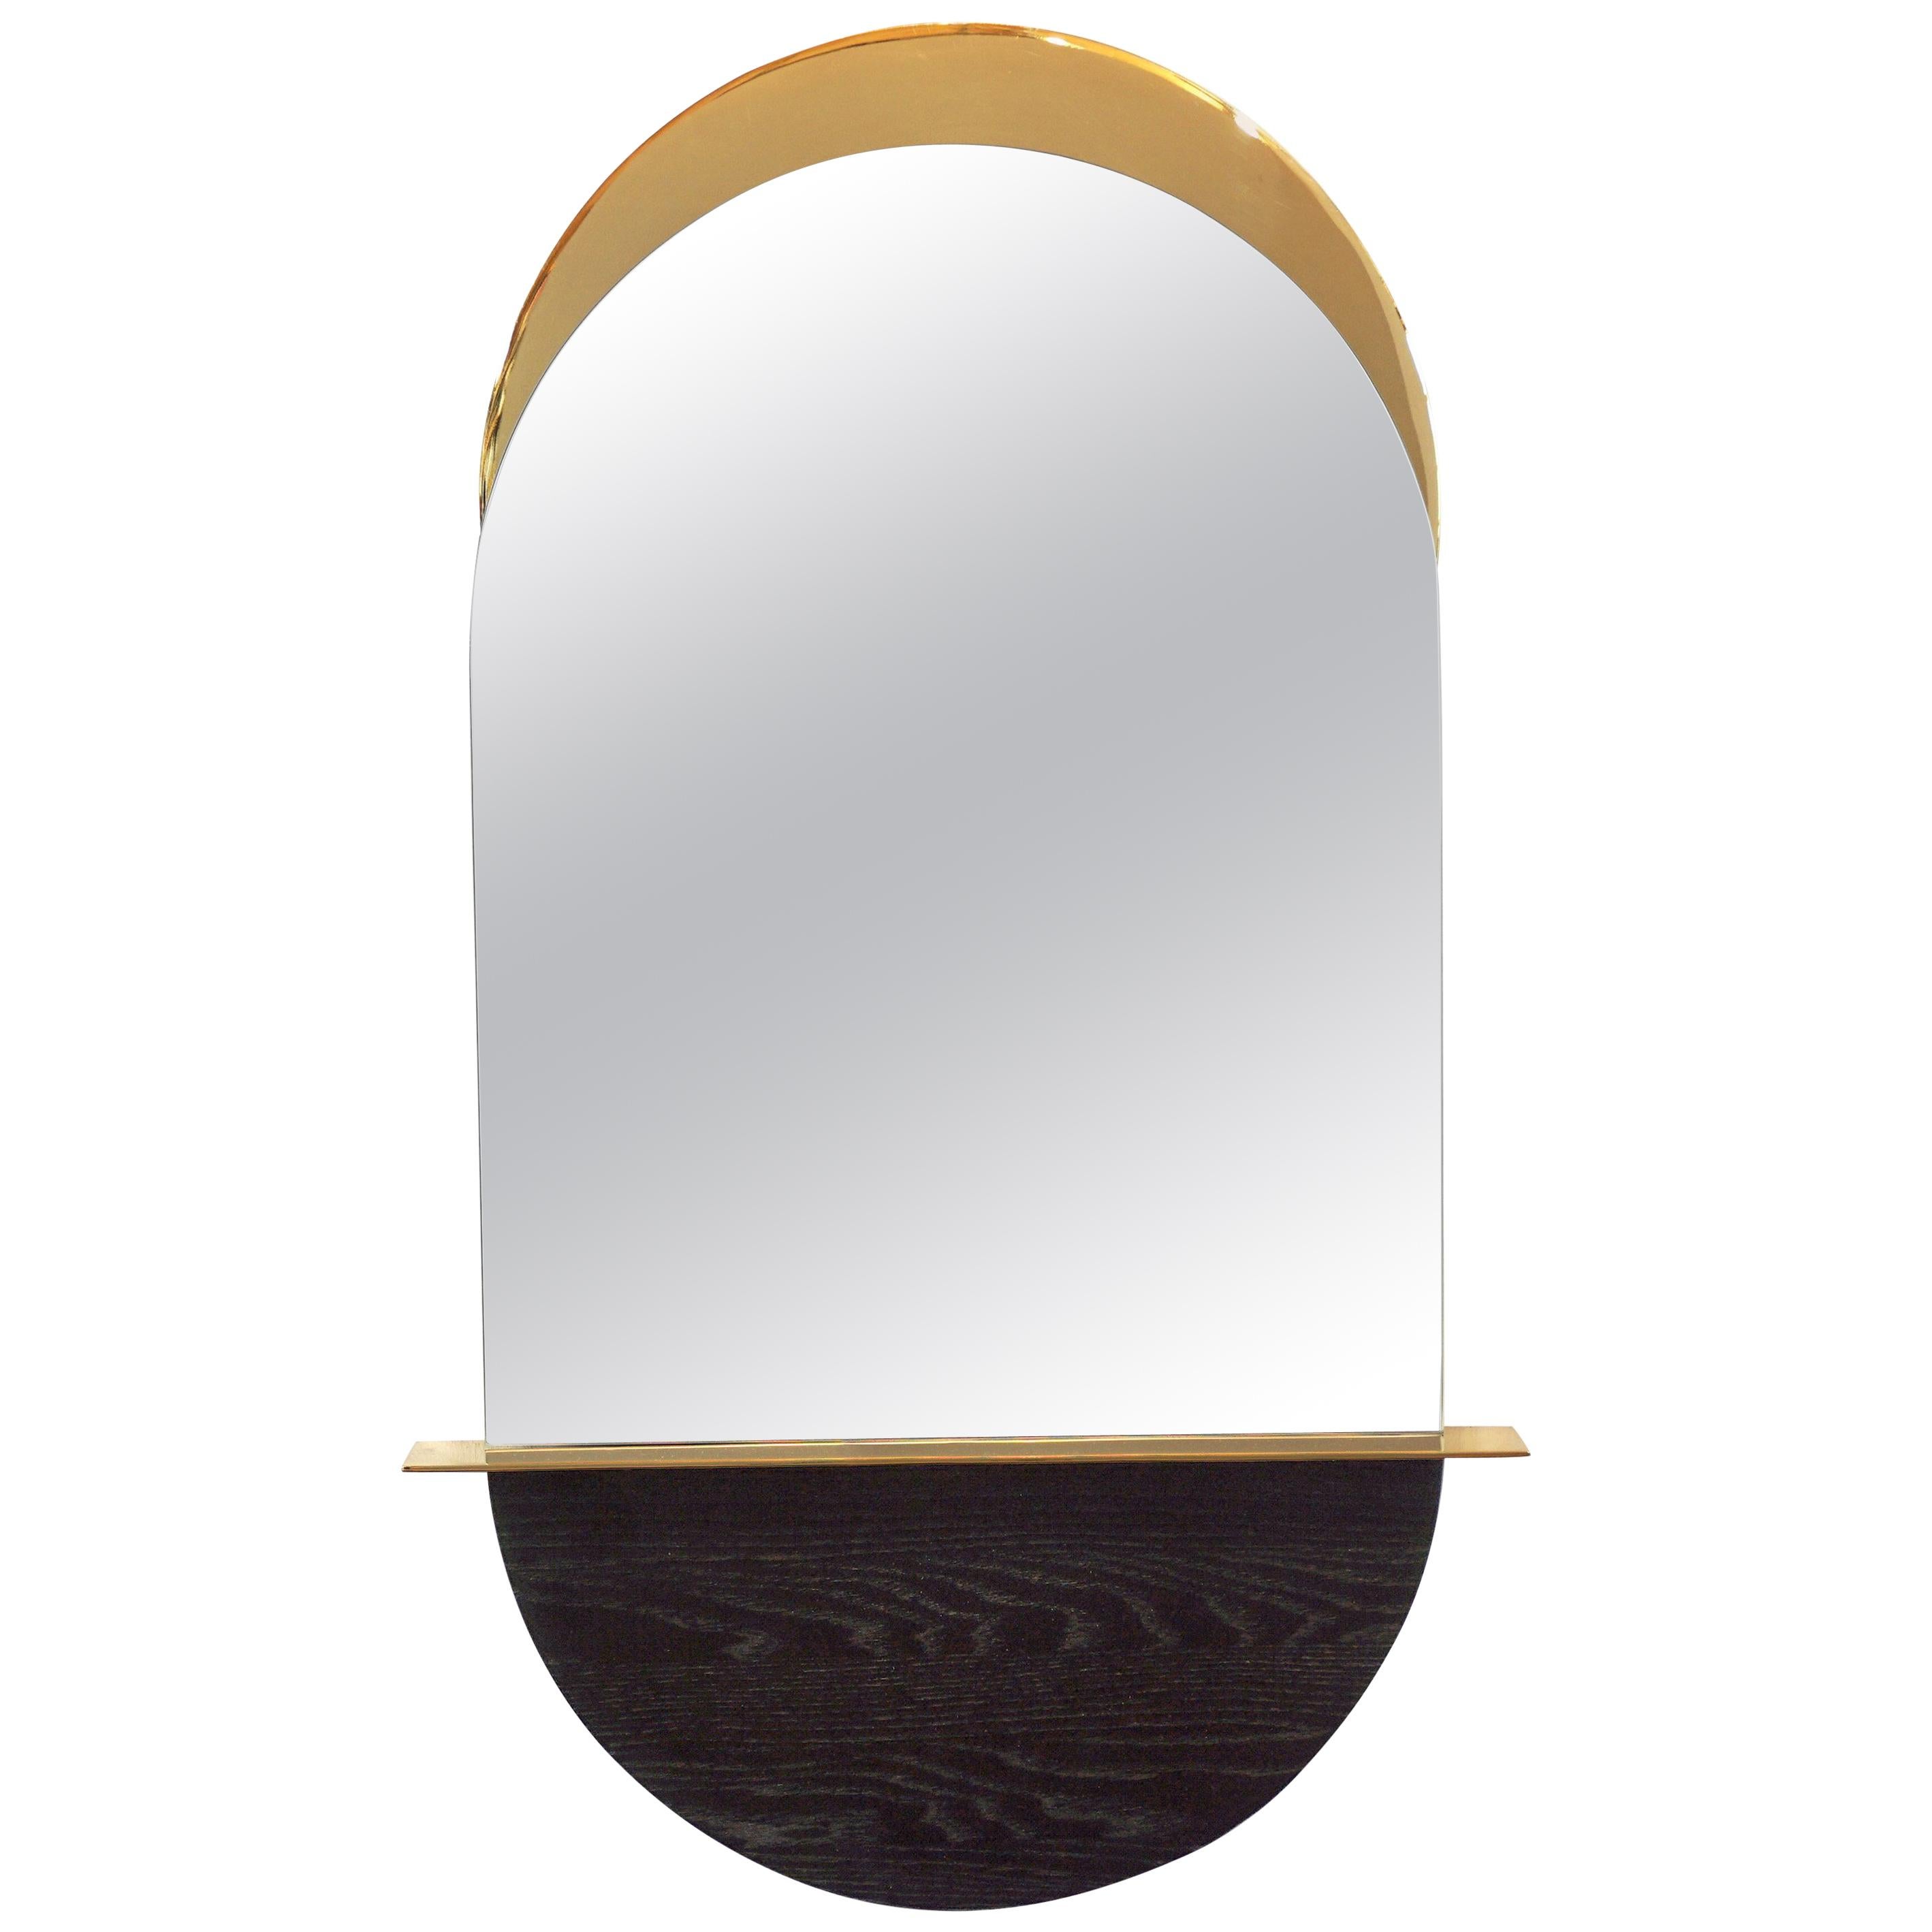 Solis Mirror (Small) in Polished Brass and Blackened Ash by Simon Johns